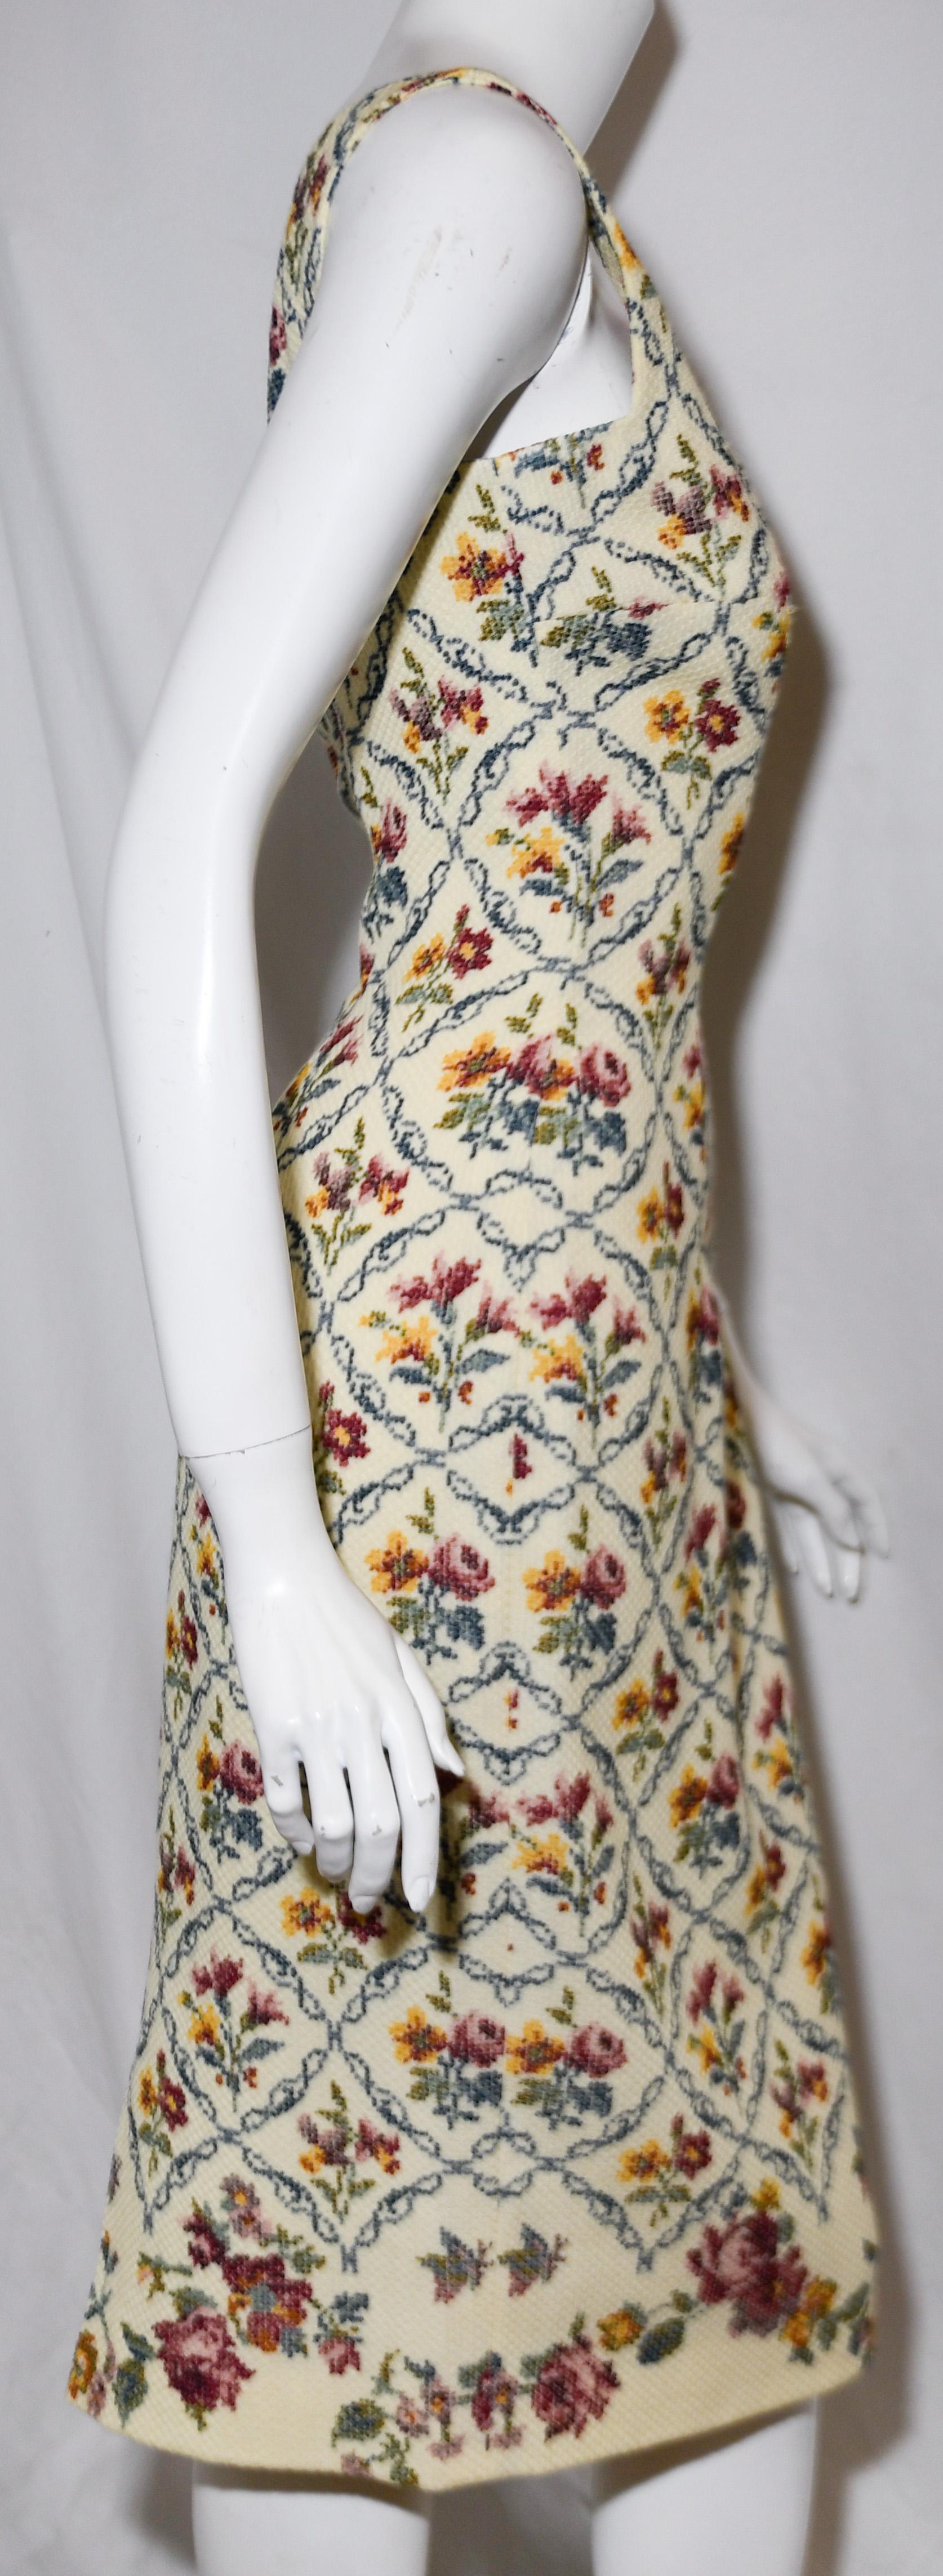 Christian Dior Needle Point Floral Print Dress & Jacket Suit  In Excellent Condition For Sale In Palm Beach, FL